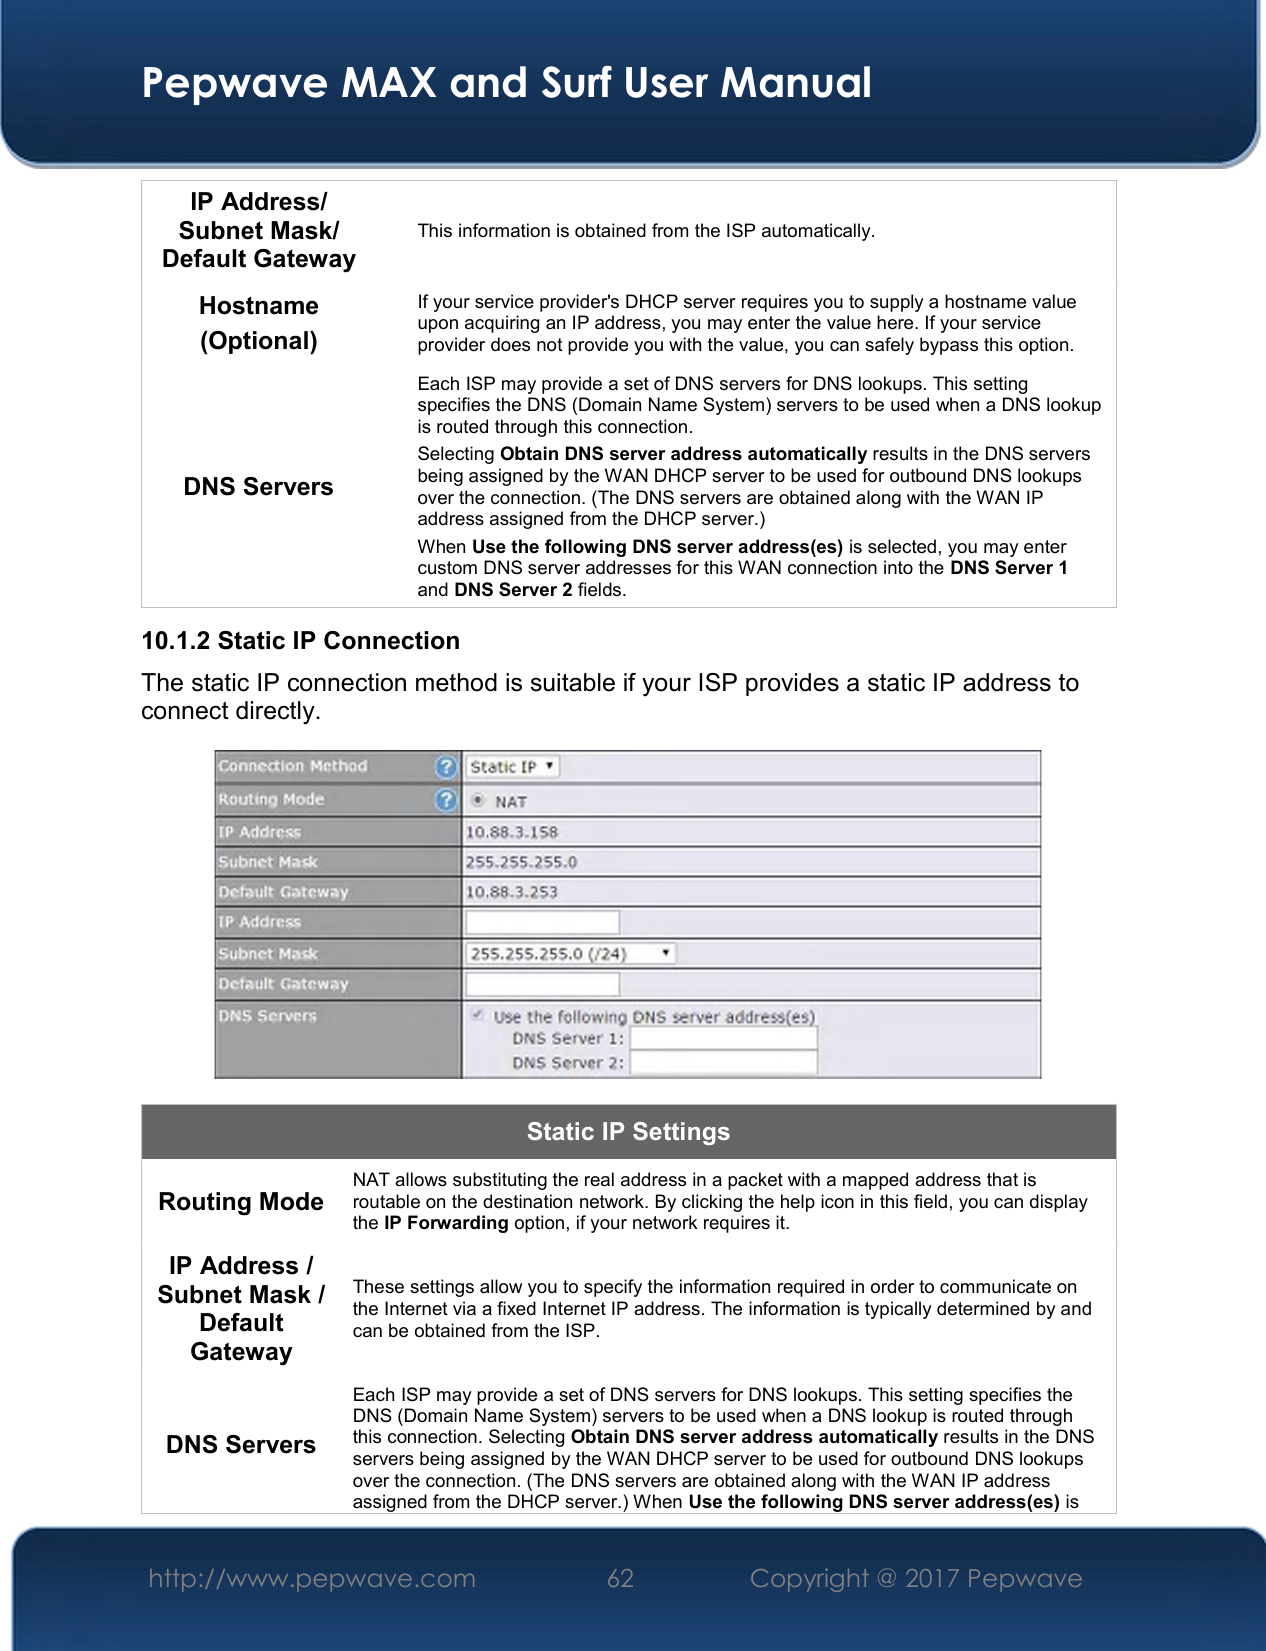  Pepwave MAX and Surf User Manual http://www.pepwave.com  62    Copyright @ 2017 Pepwave   IP Address/ Subnet Mask/ Default Gateway This information is obtained from the ISP automatically. Hostname (Optional) If your service provider&apos;s DHCP server requires you to supply a hostname value upon acquiring an IP address, you may enter the value here. If your service provider does not provide you with the value, you can safely bypass this option. DNS Servers Each ISP may provide a set of DNS servers for DNS lookups. This setting specifies the DNS (Domain Name System) servers to be used when a DNS lookup is routed through this connection.  Selecting Obtain DNS server address automatically results in the DNS servers being assigned by the WAN DHCP server to be used for outbound DNS lookups over the connection. (The DNS servers are obtained along with the WAN IP address assigned from the DHCP server.) When Use the following DNS server address(es) is selected, you may enter custom DNS server addresses for this WAN connection into the DNS Server 1 and DNS Server 2 fields. 10.1.2 Static IP Connection The static IP connection method is suitable if your ISP provides a static IP address to connect directly.   Static IP Settings Routing Mode  NAT allows substituting the real address in a packet with a mapped address that is routable on the destination network. By clicking the help icon in this field, you can display the IP Forwarding option, if your network requires it. IP Address / Subnet Mask / Default Gateway These settings allow you to specify the information required in order to communicate on the Internet via a fixed Internet IP address. The information is typically determined by and can be obtained from the ISP. DNS Servers Each ISP may provide a set of DNS servers for DNS lookups. This setting specifies the DNS (Domain Name System) servers to be used when a DNS lookup is routed through this connection. Selecting Obtain DNS server address automatically results in the DNS servers being assigned by the WAN DHCP server to be used for outbound DNS lookups over the connection. (The DNS servers are obtained along with the WAN IP address assigned from the DHCP server.) When Use the following DNS server address(es) is 